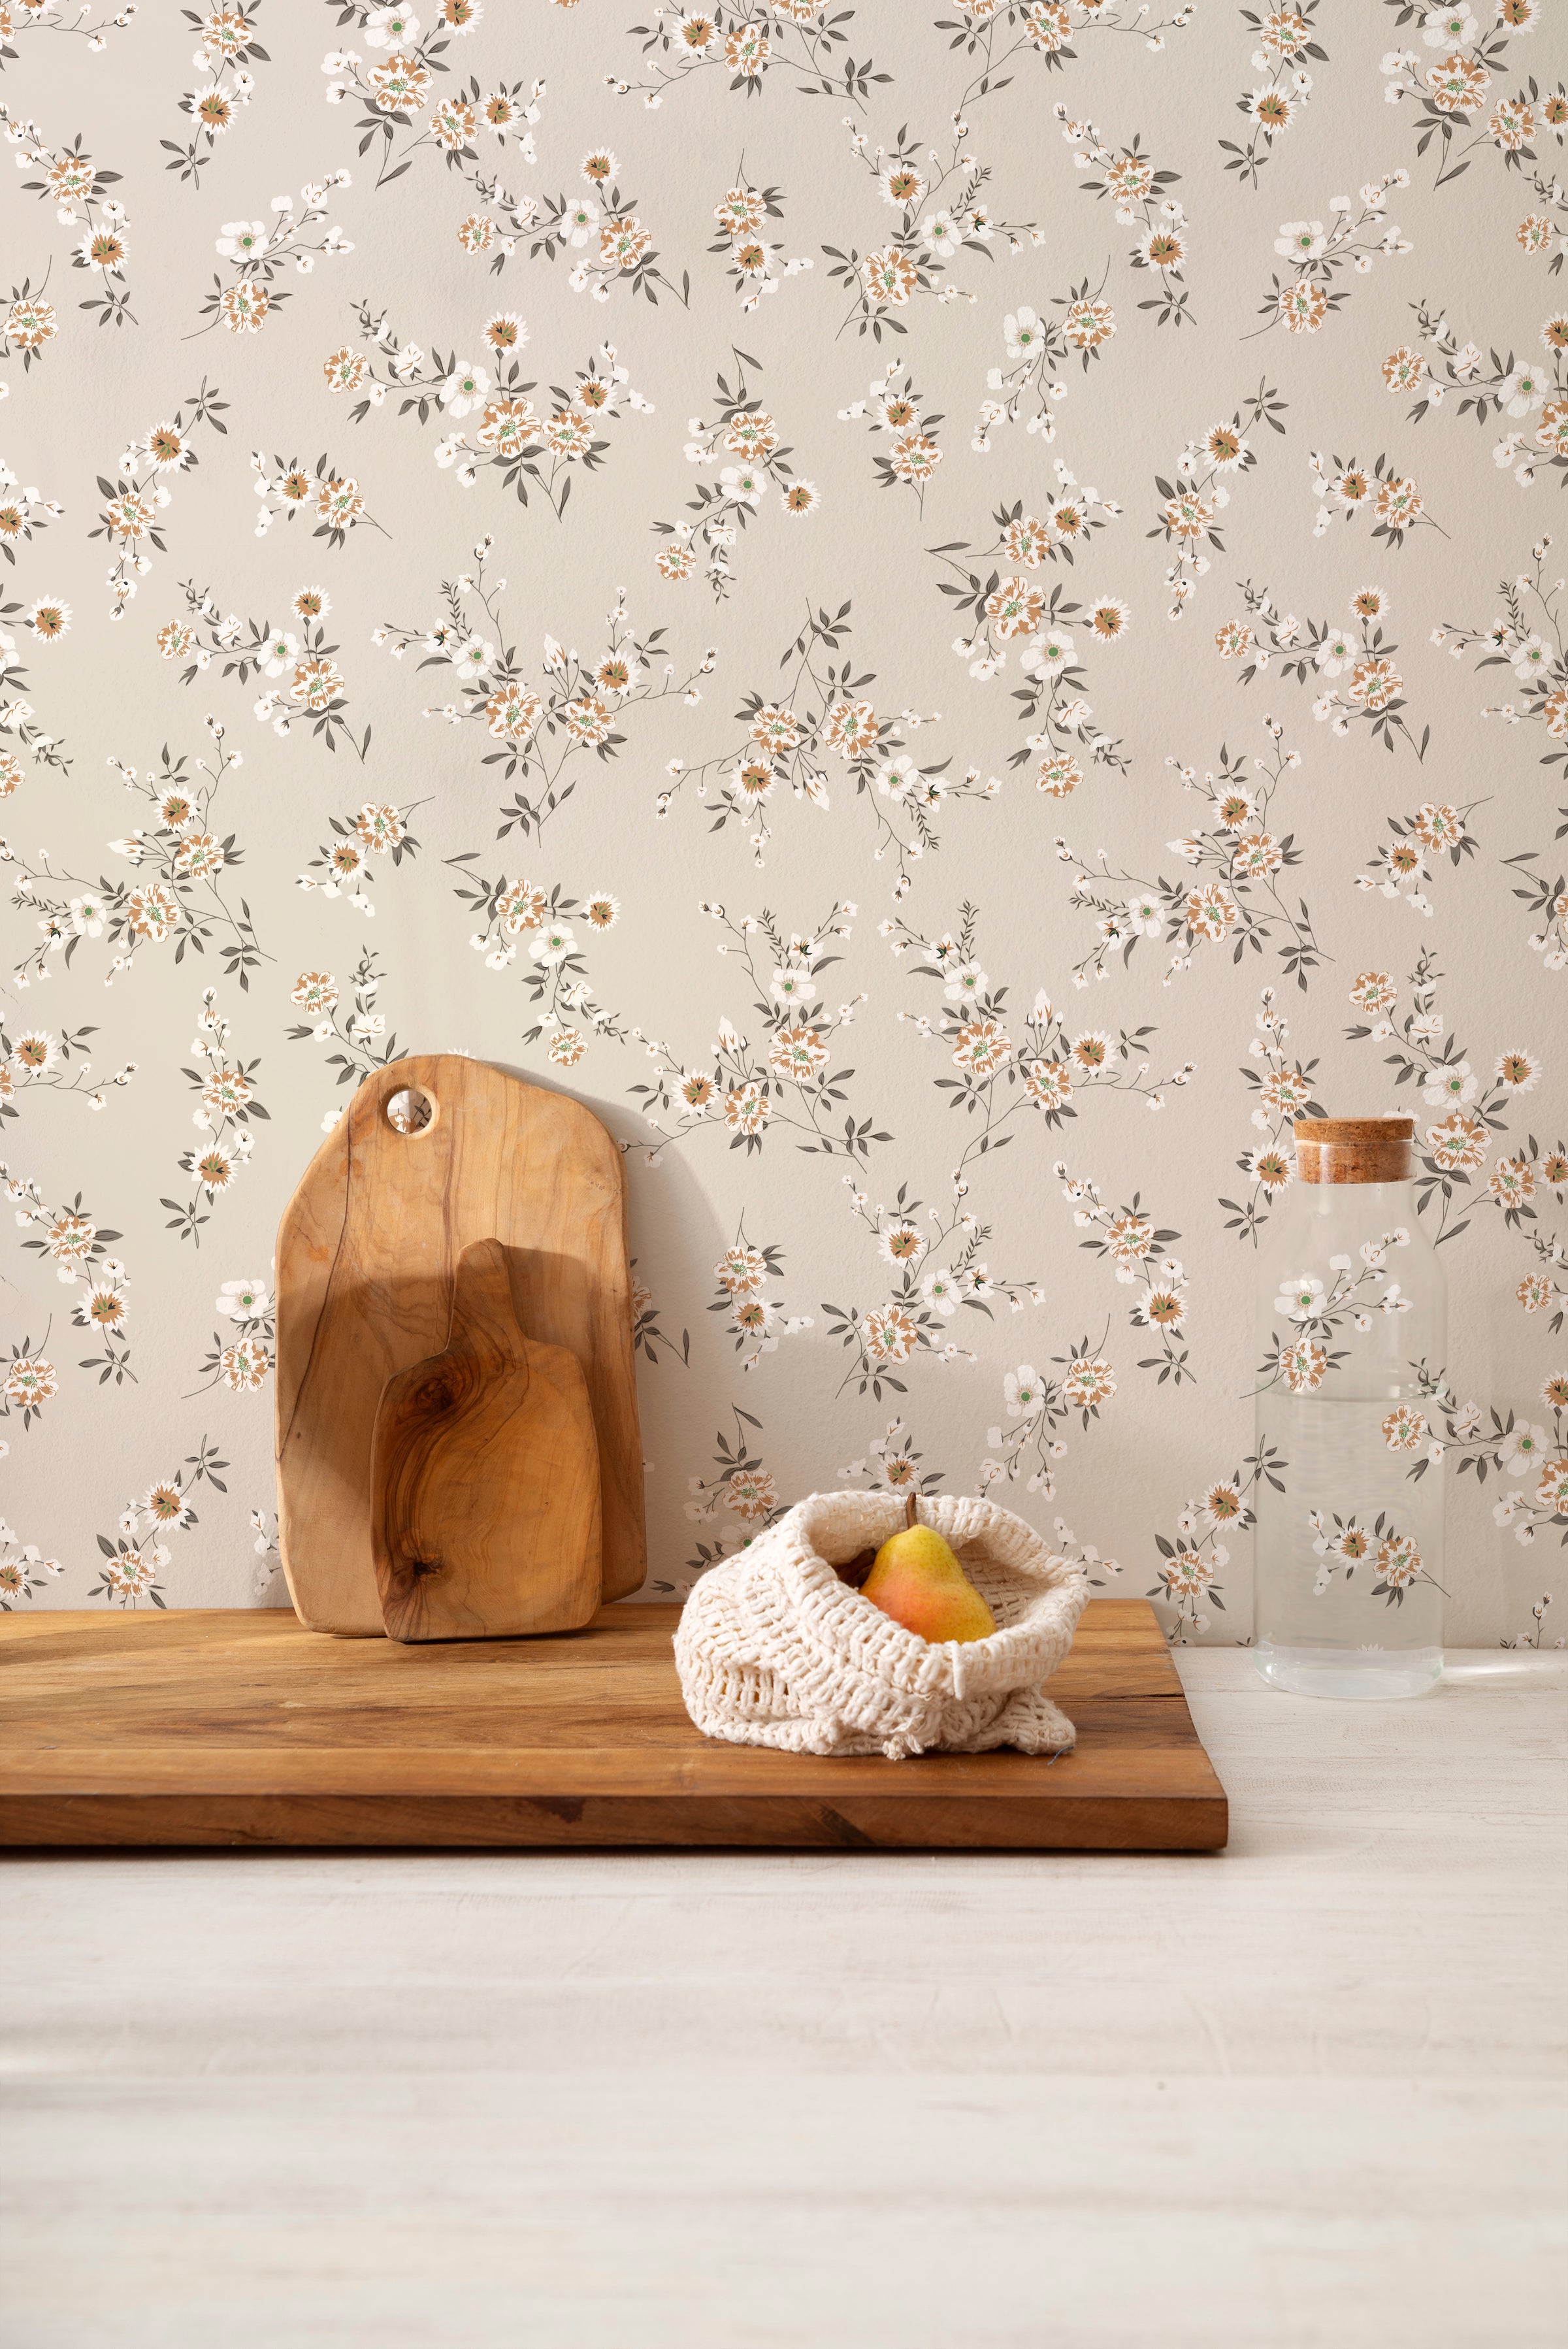 A kitchen countertop against the Classic Floral Wallpaper - Ecru, with a wooden cutting board, glass jar, and a knitted fruit bowl in front, creating a homey and inviting atmosphere.